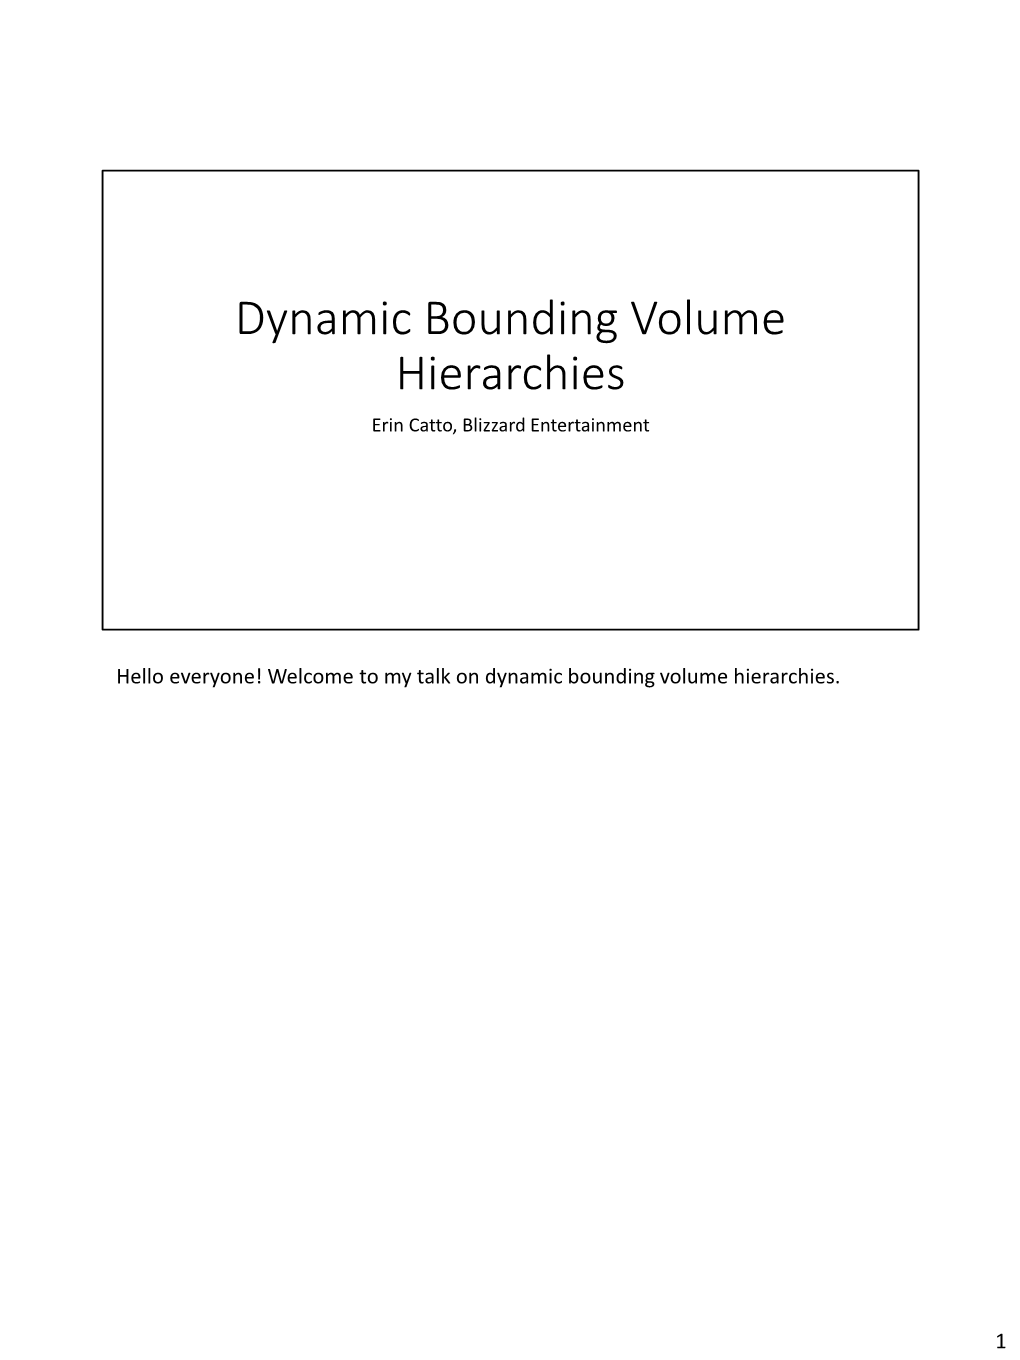 Dynamic Bounding Volume Hierarchies Erin Catto, Blizzard Entertainment